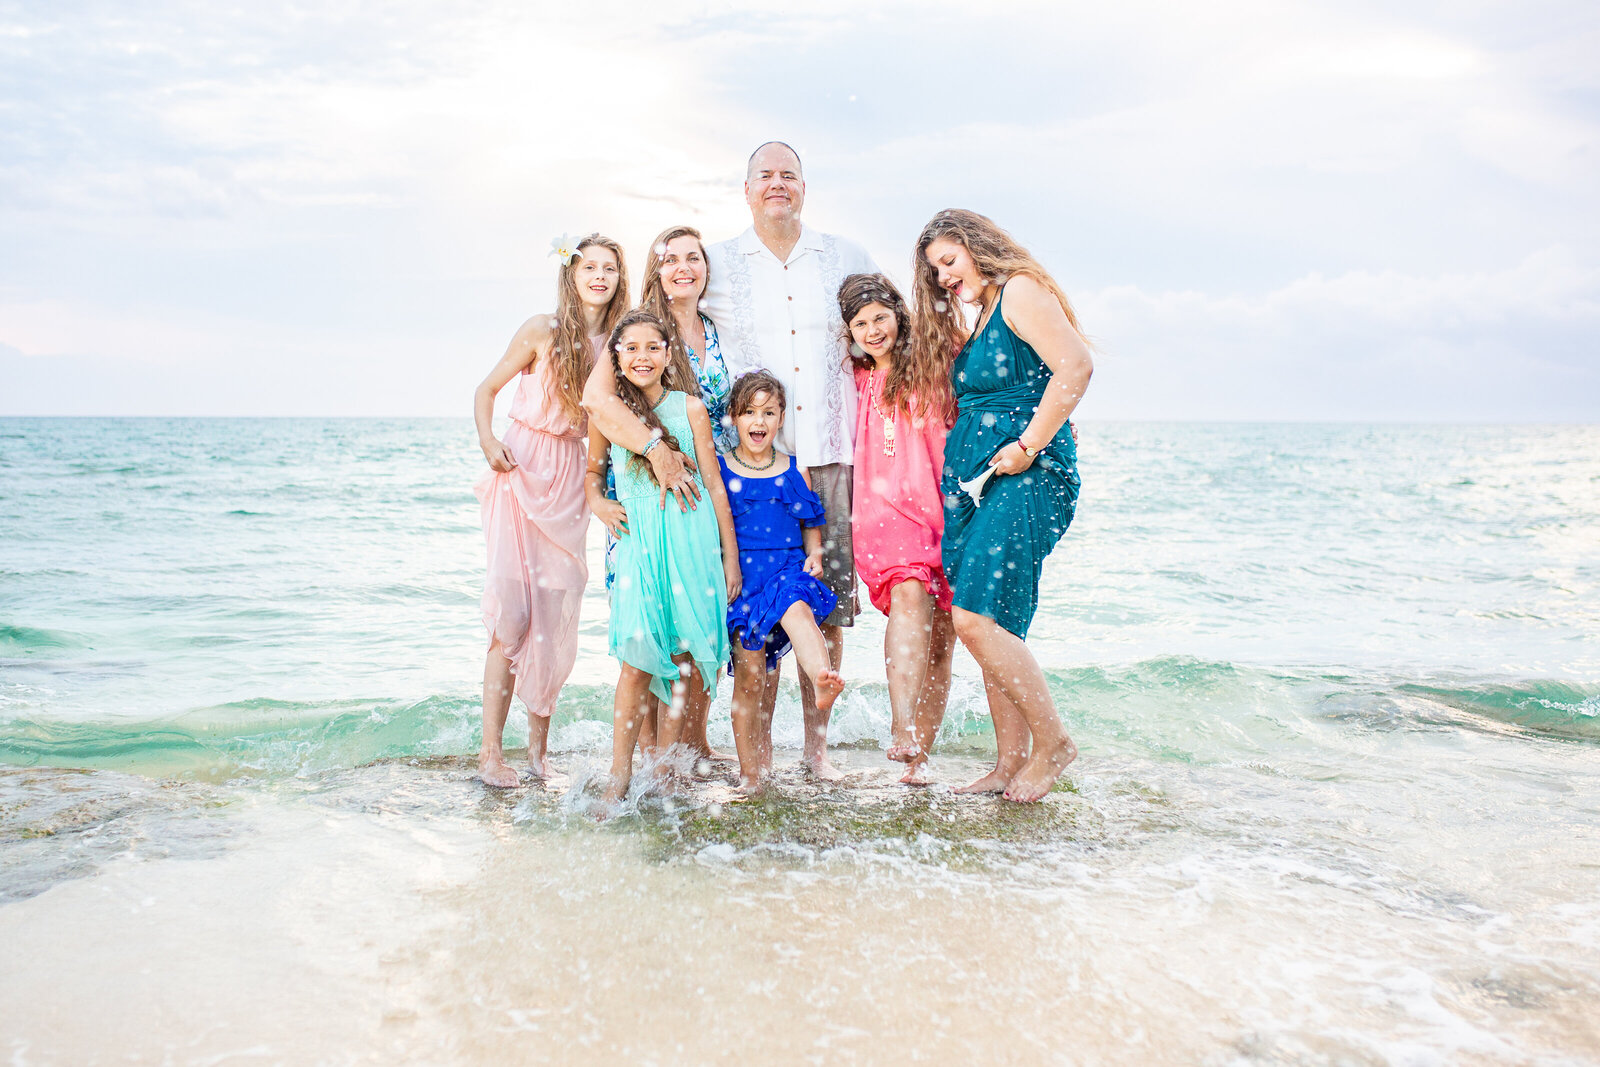 oahu family photographer 5802 by Alison Bell, Photographer